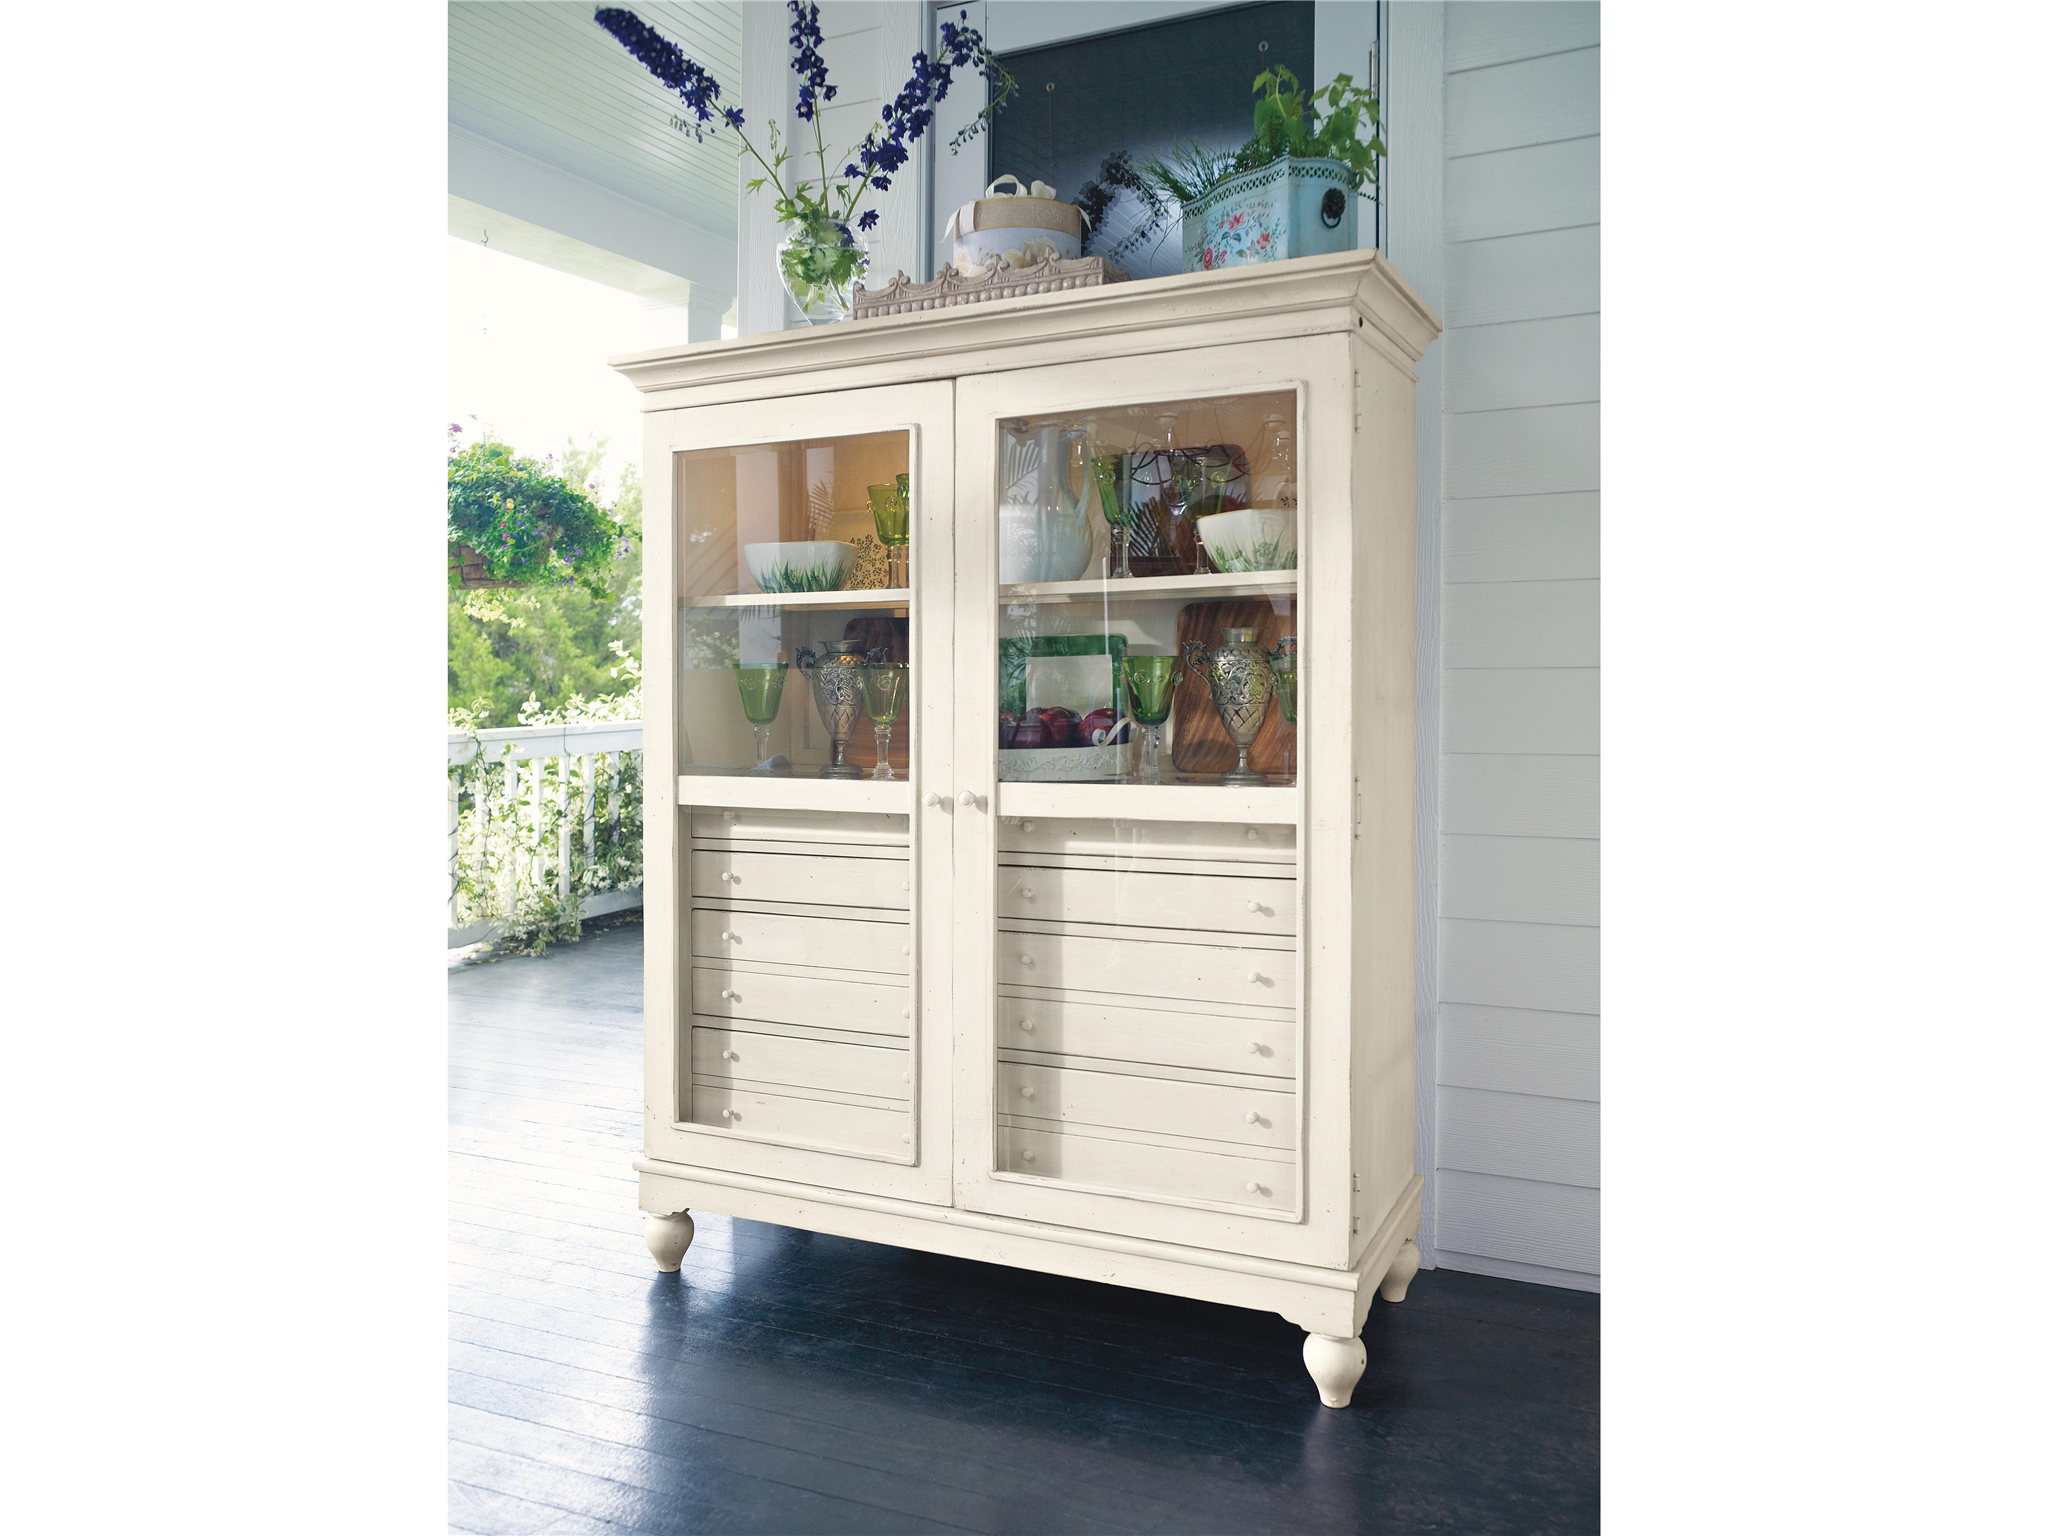 Paula Deen Home The Bag Lady S Cabinet Universal Furniture